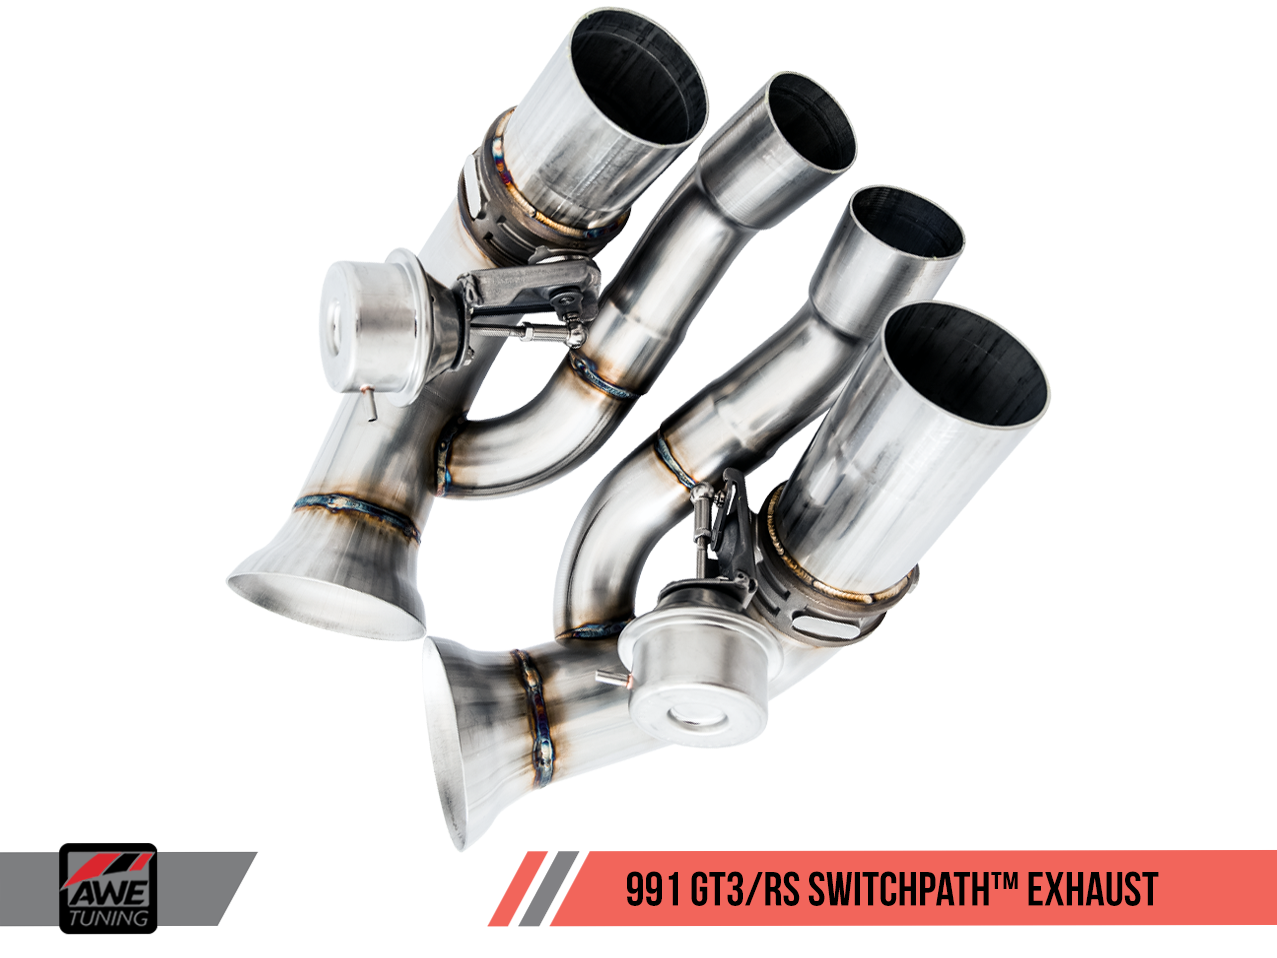 AWE SwitchPath Exhaust for Porsche 991.1 / 991.2 GT3 / RS - Chrome Silver Tips